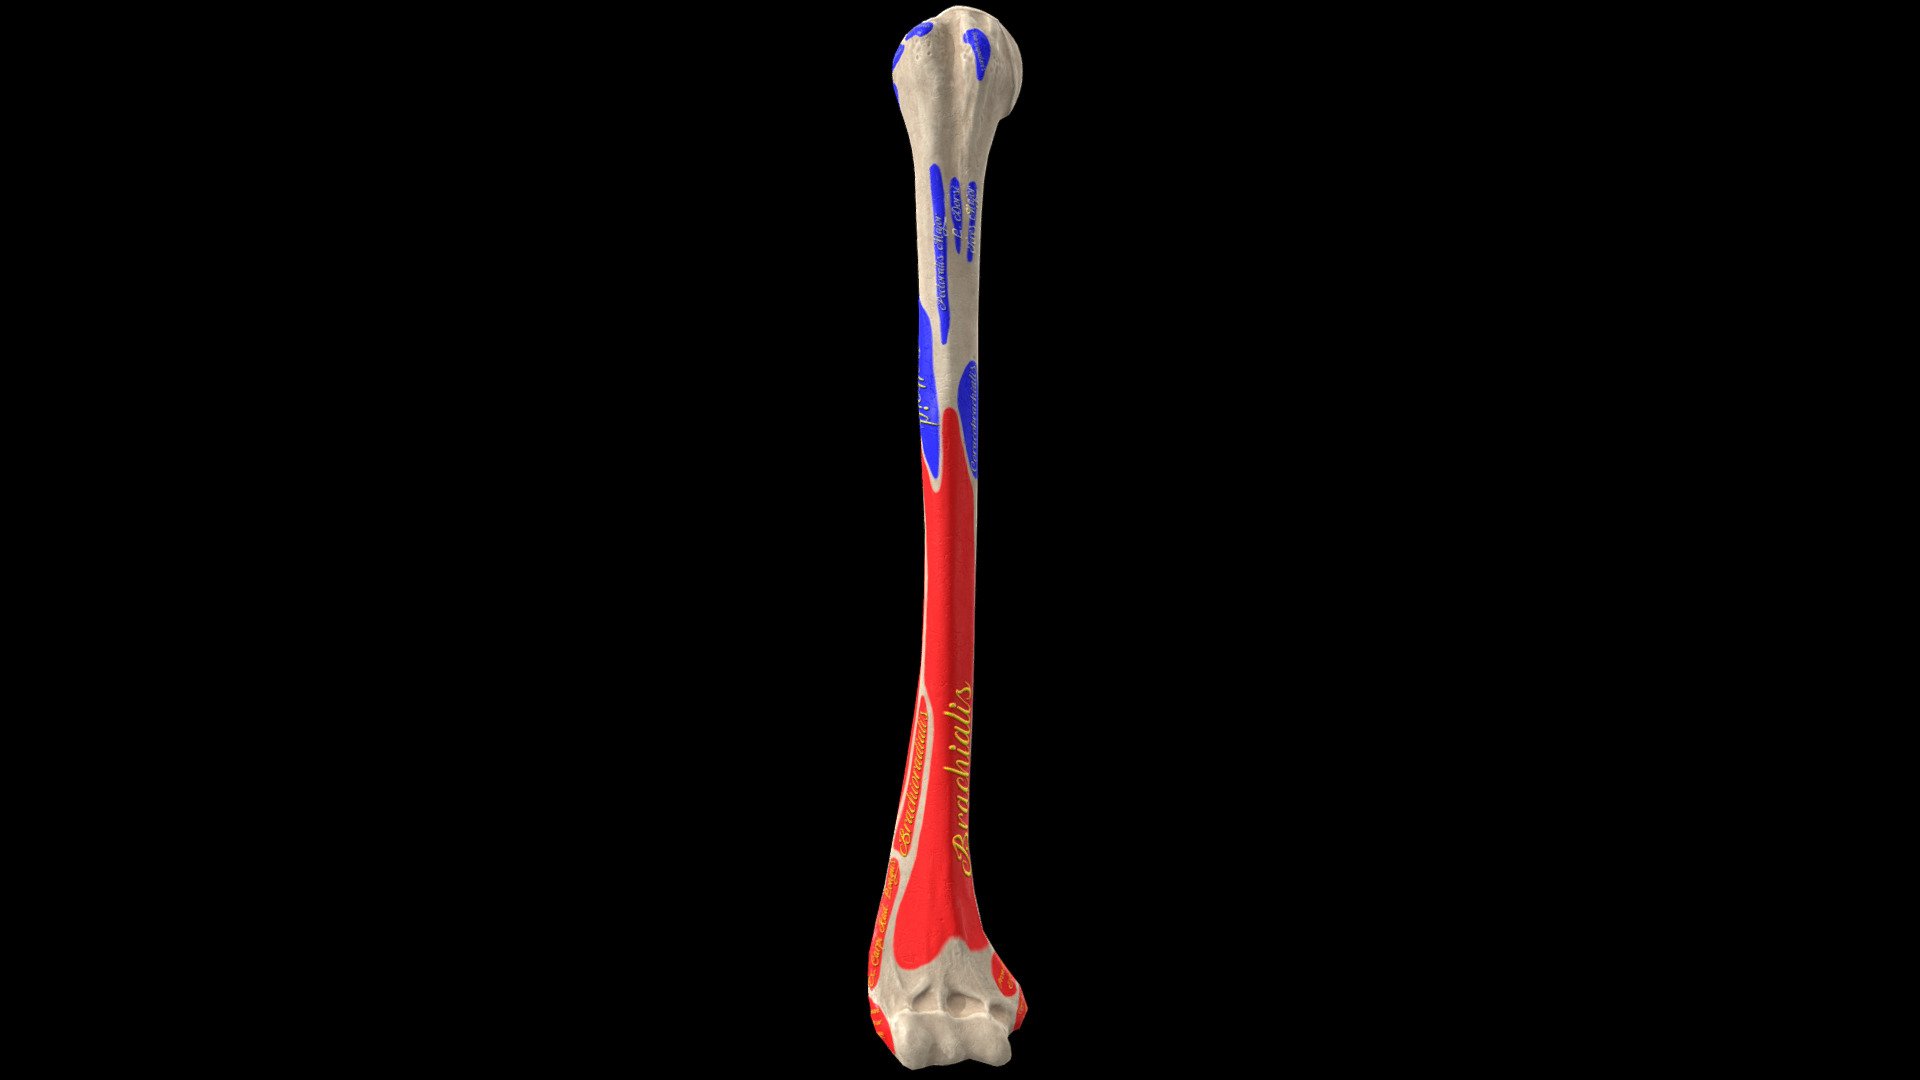 Humerus bone showing landmarks including origins and insertions of muscles on it.

Click here if you want to see the model without labeling - Humerus bone with landmarks and labels - Buy Royalty Free 3D model by Anatomy by Doctor Jana (@docjana) 3d model